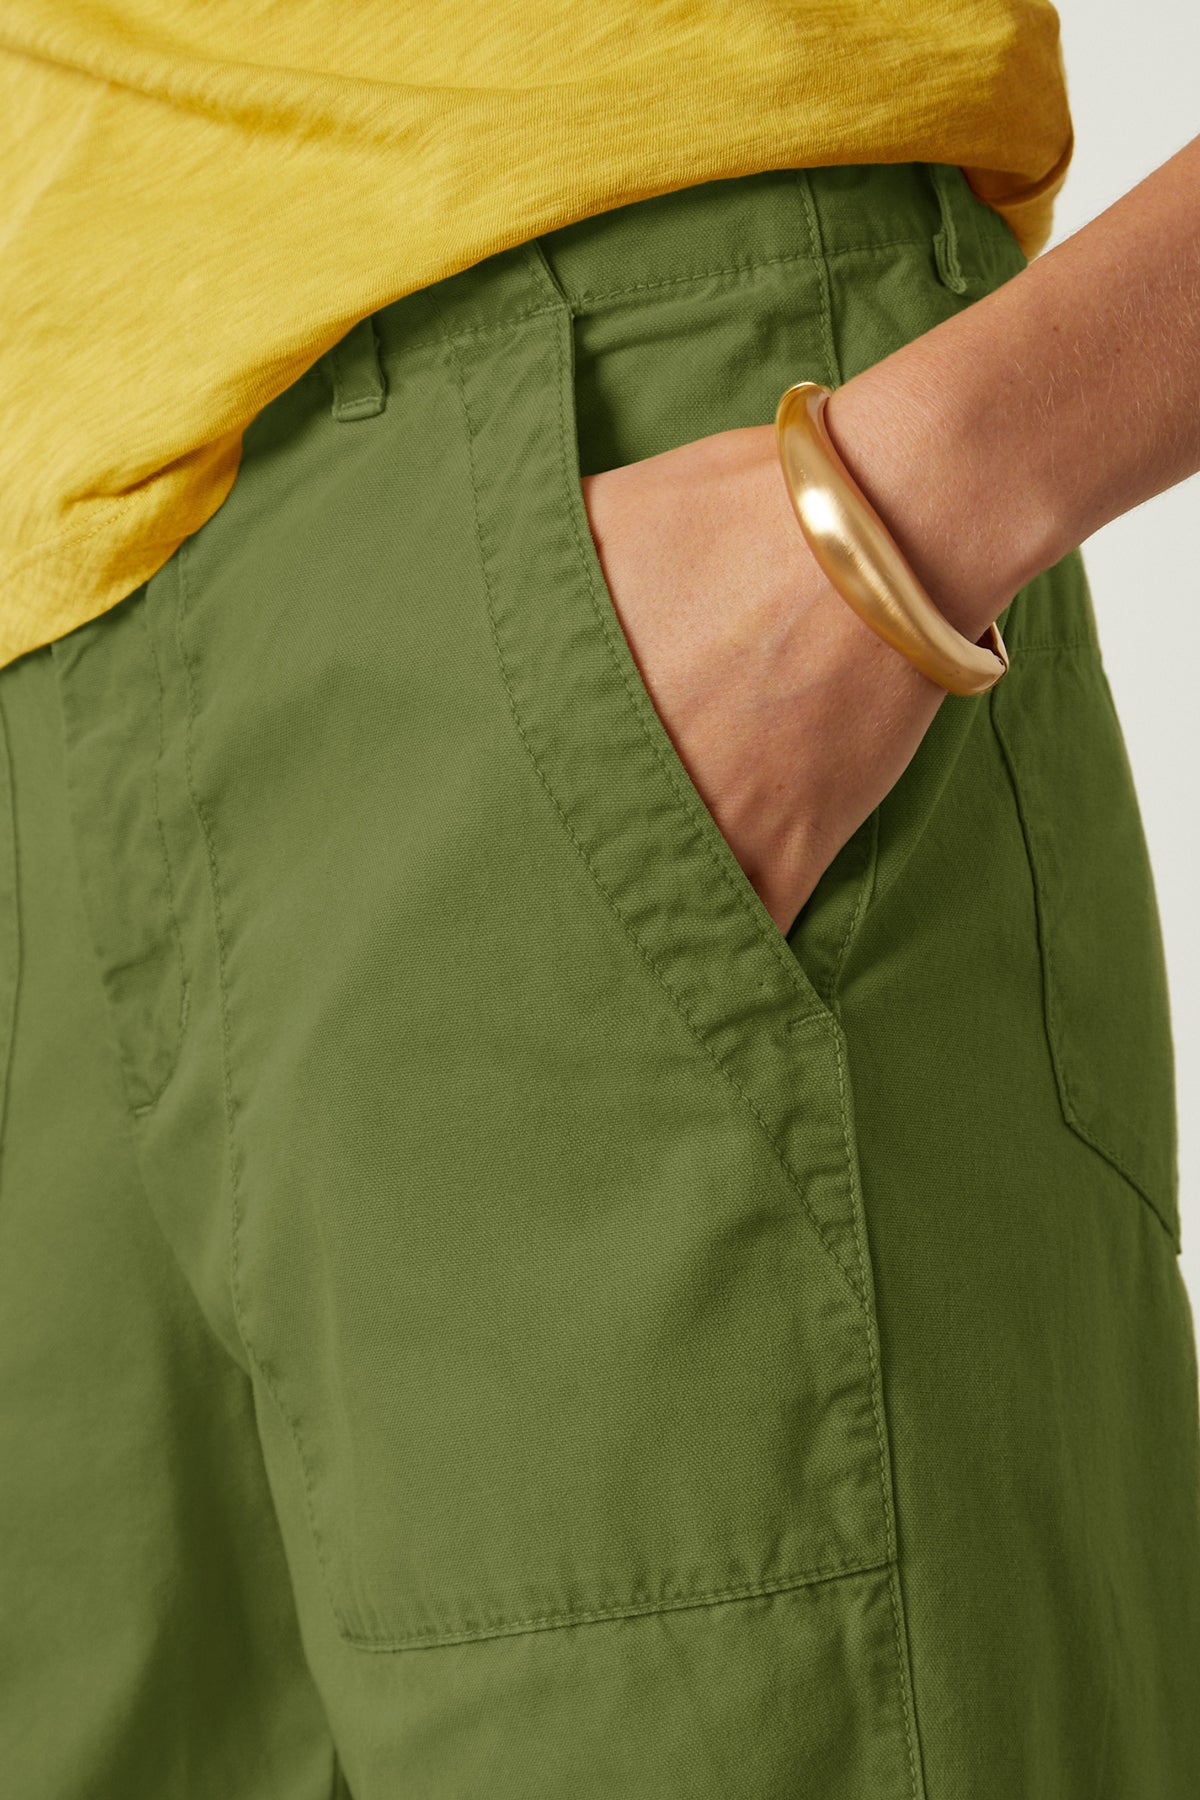   Mya Pant in soft army green color front pocket detail 